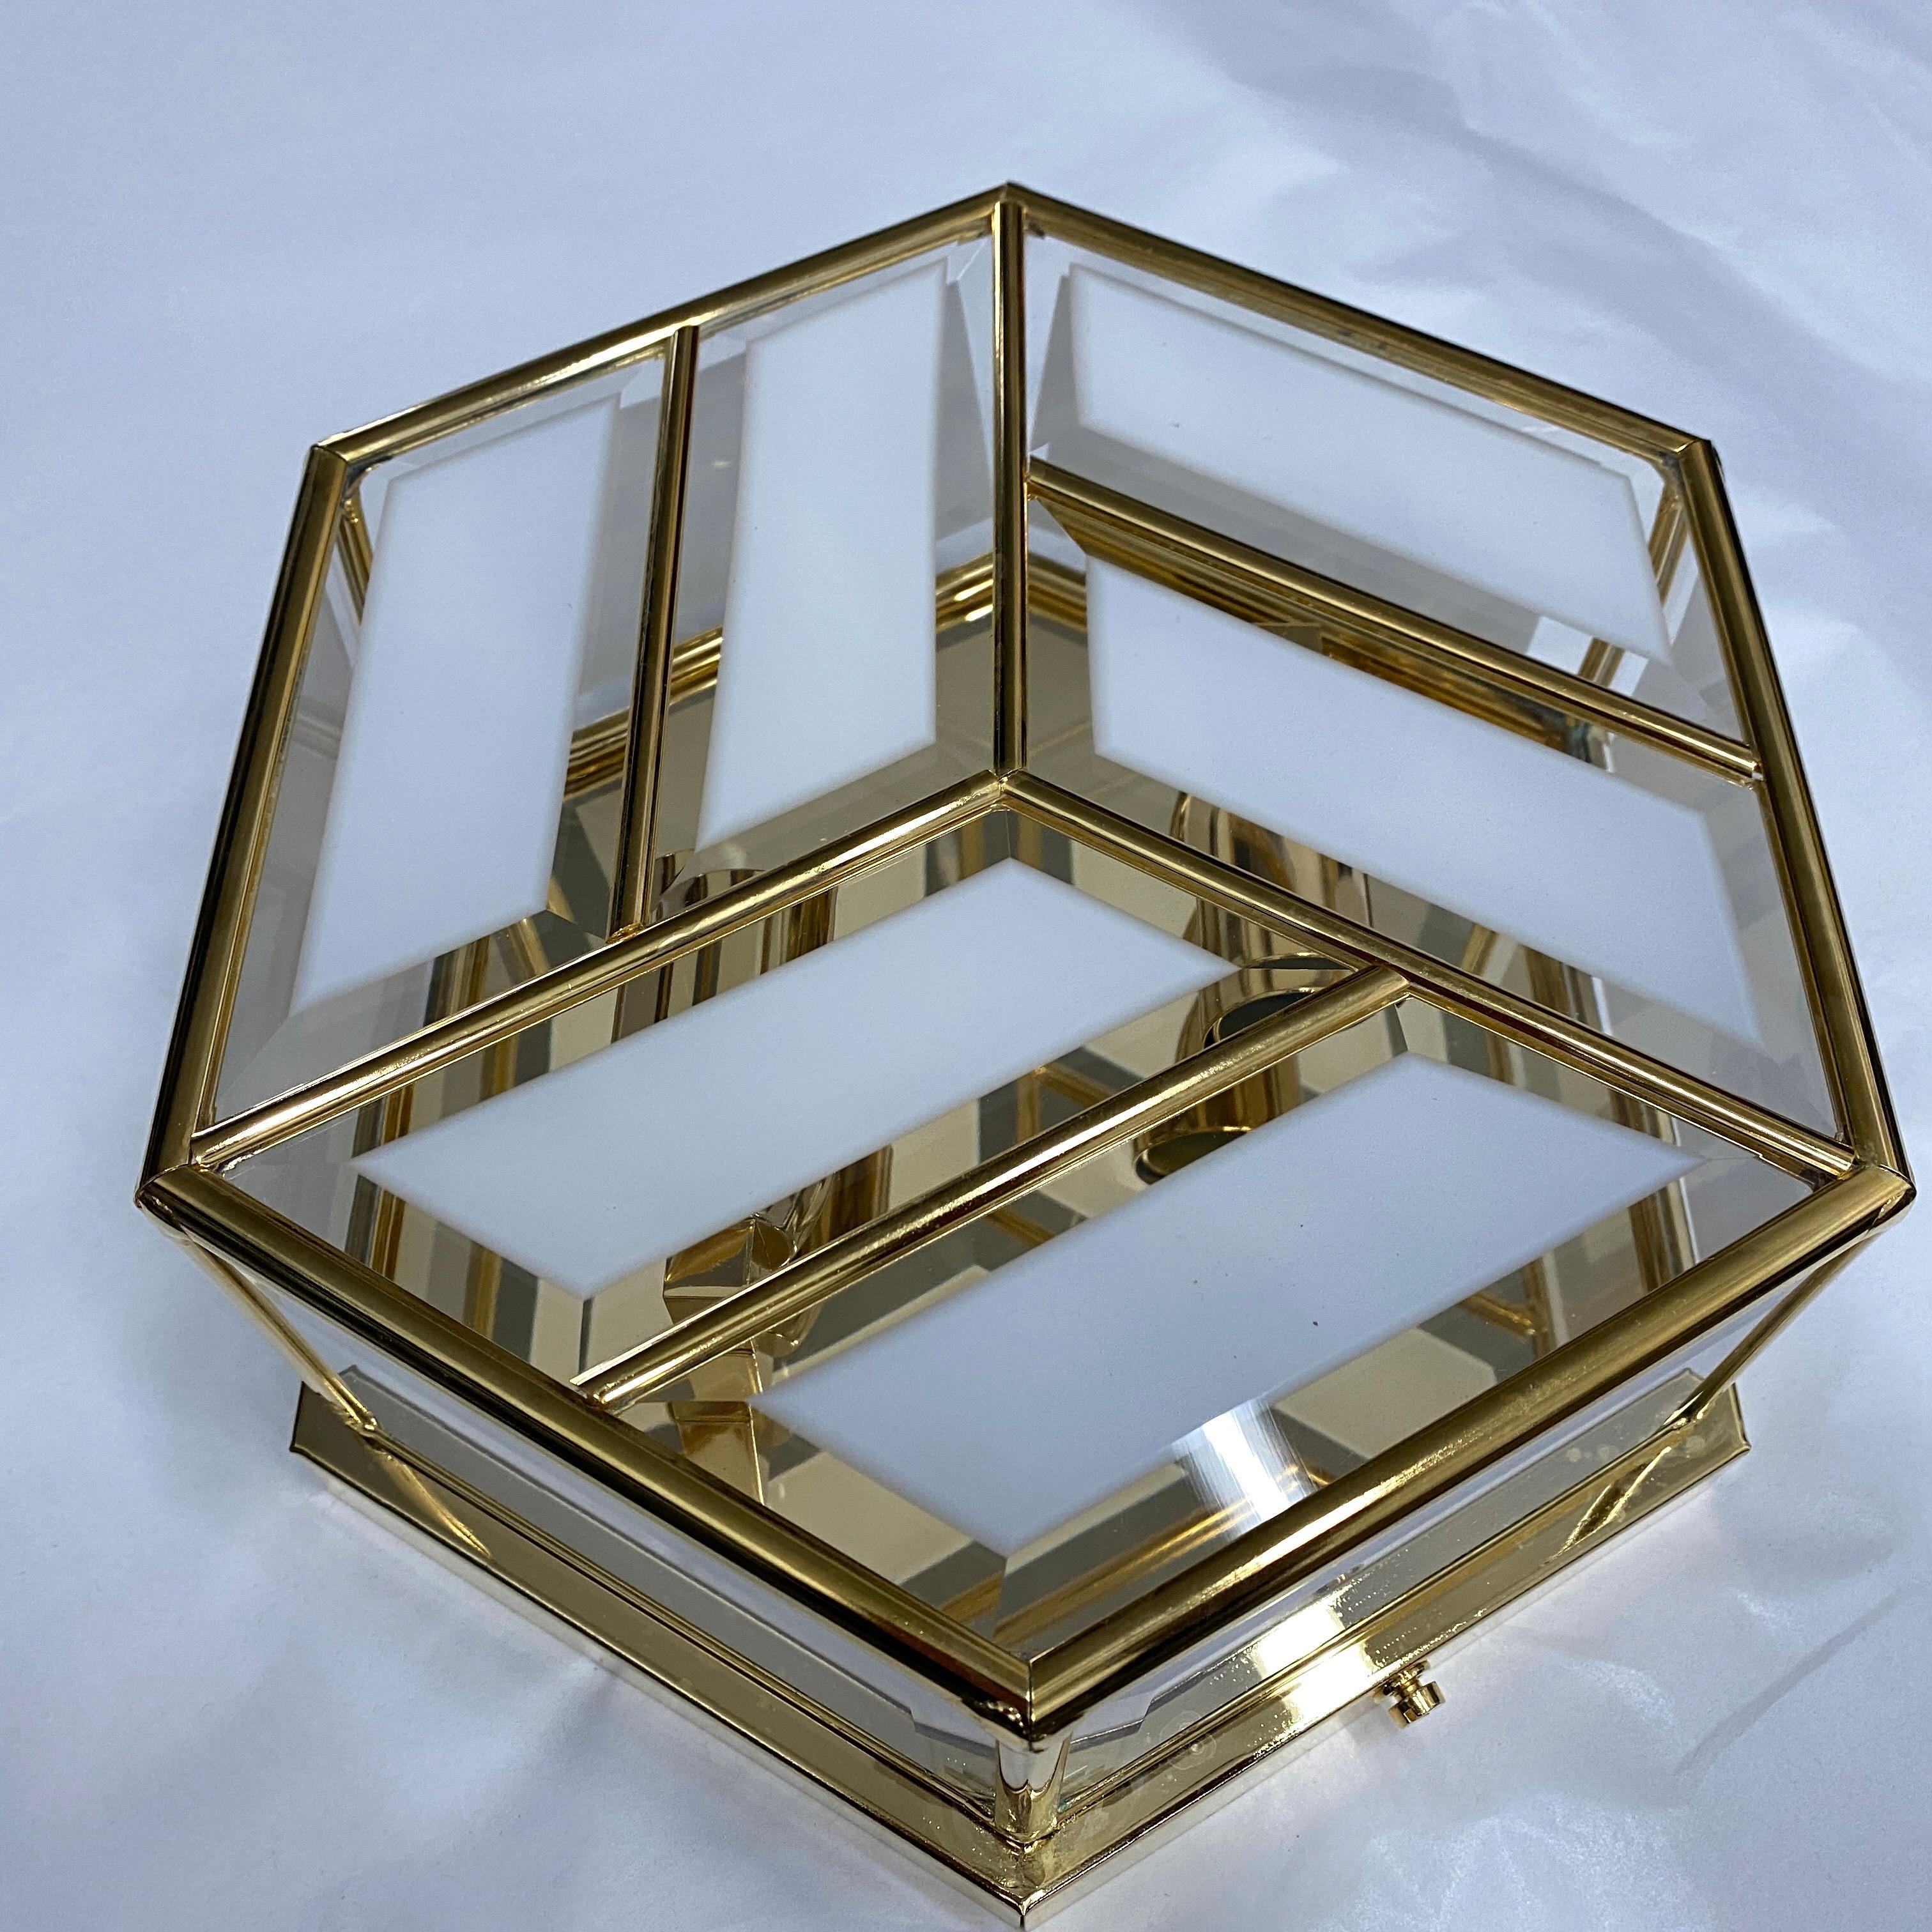 1970s Mid-Century Modern Brass and Glass Hexagonal Italian Ceiling Light In Excellent Condition For Sale In Aci Castello, IT